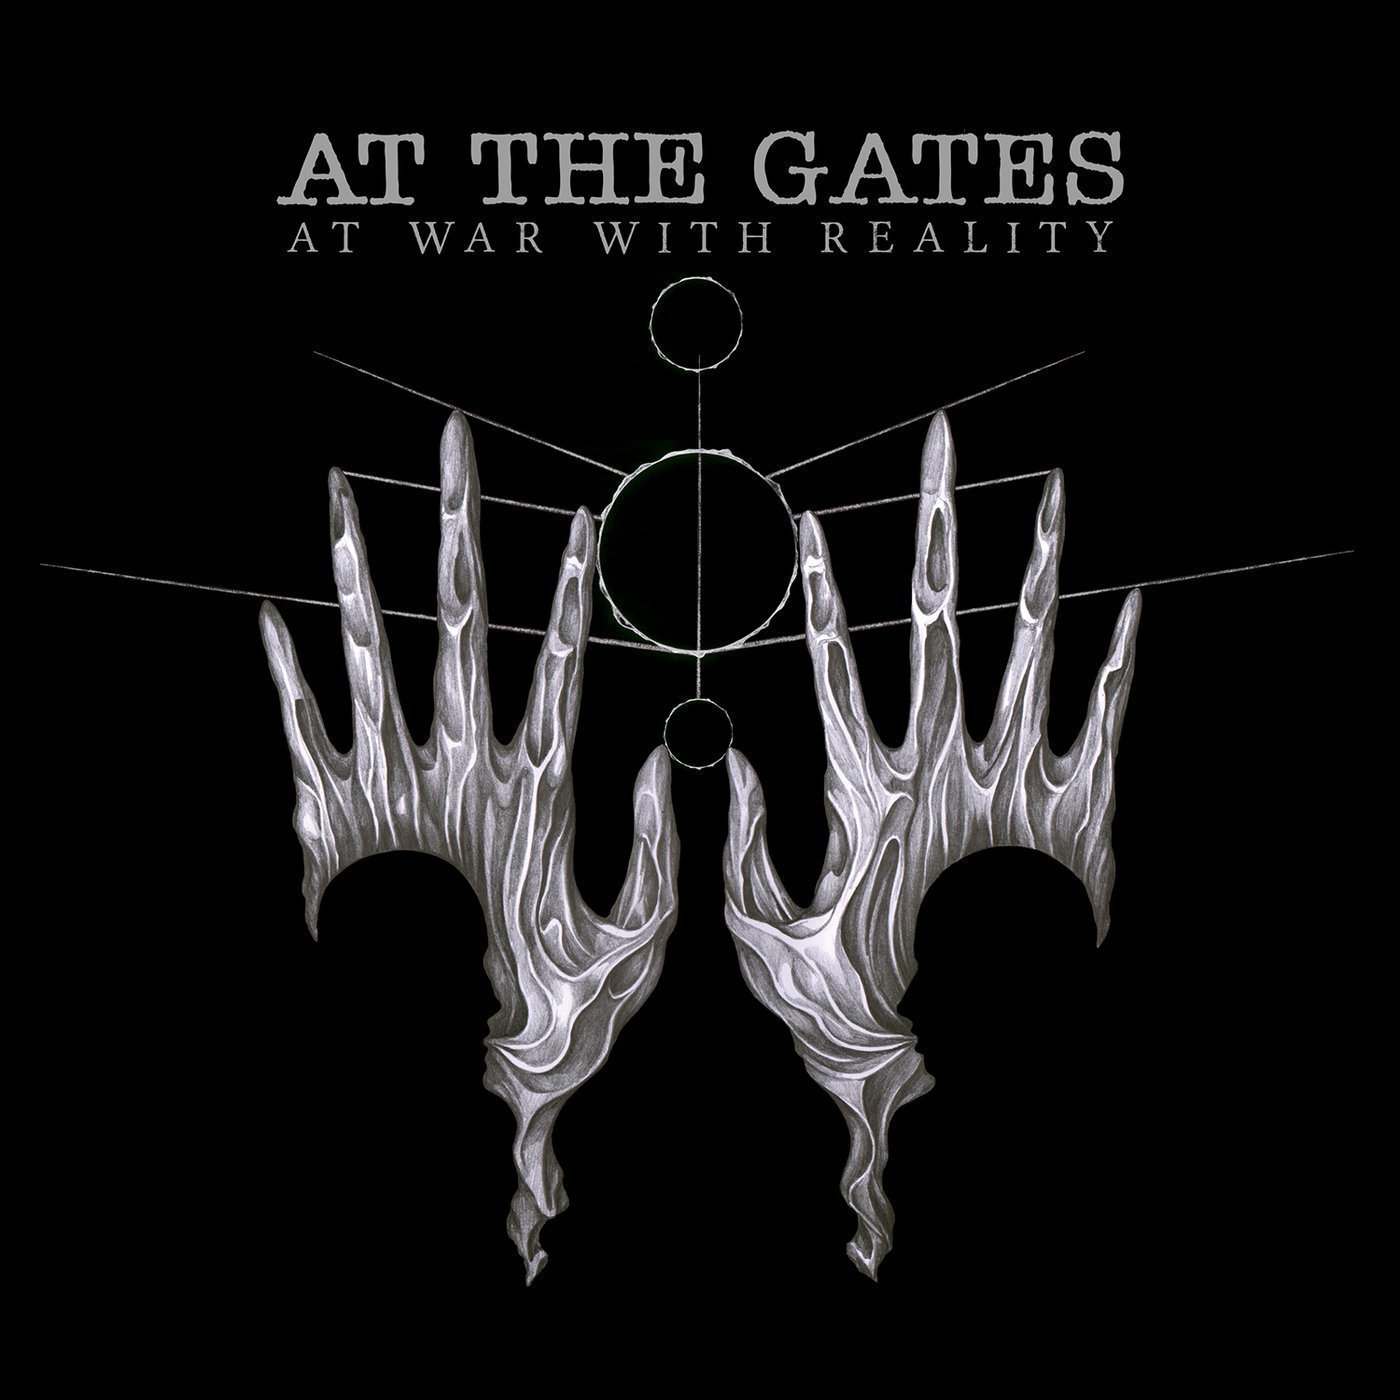 Disco de vinilo At The Gates At War With Reality (LP)